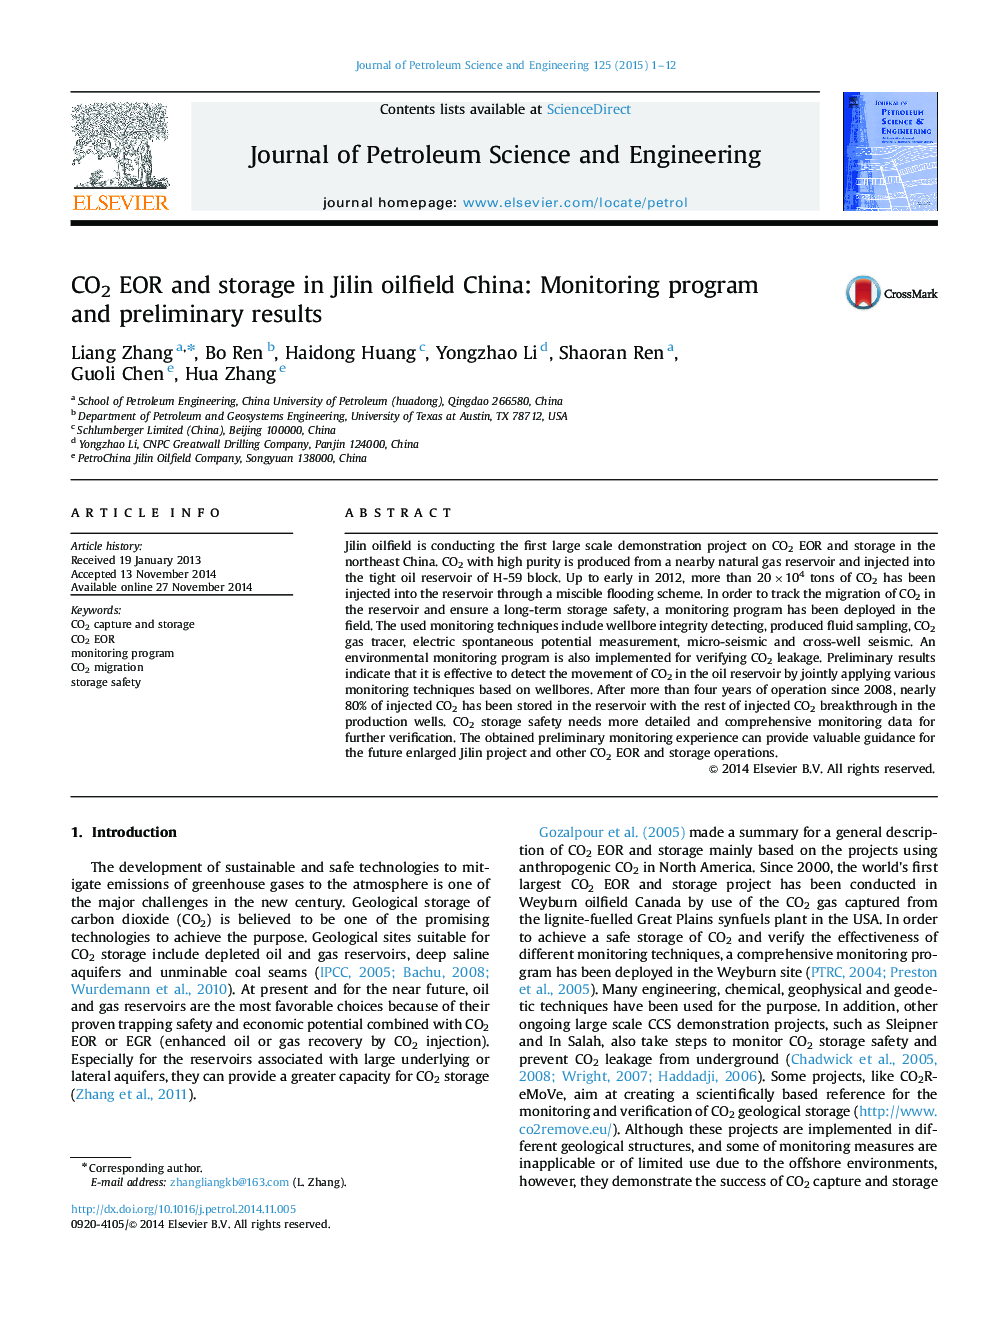 CO2 EOR and storage in Jilin oilfield China: Monitoring program and preliminary results